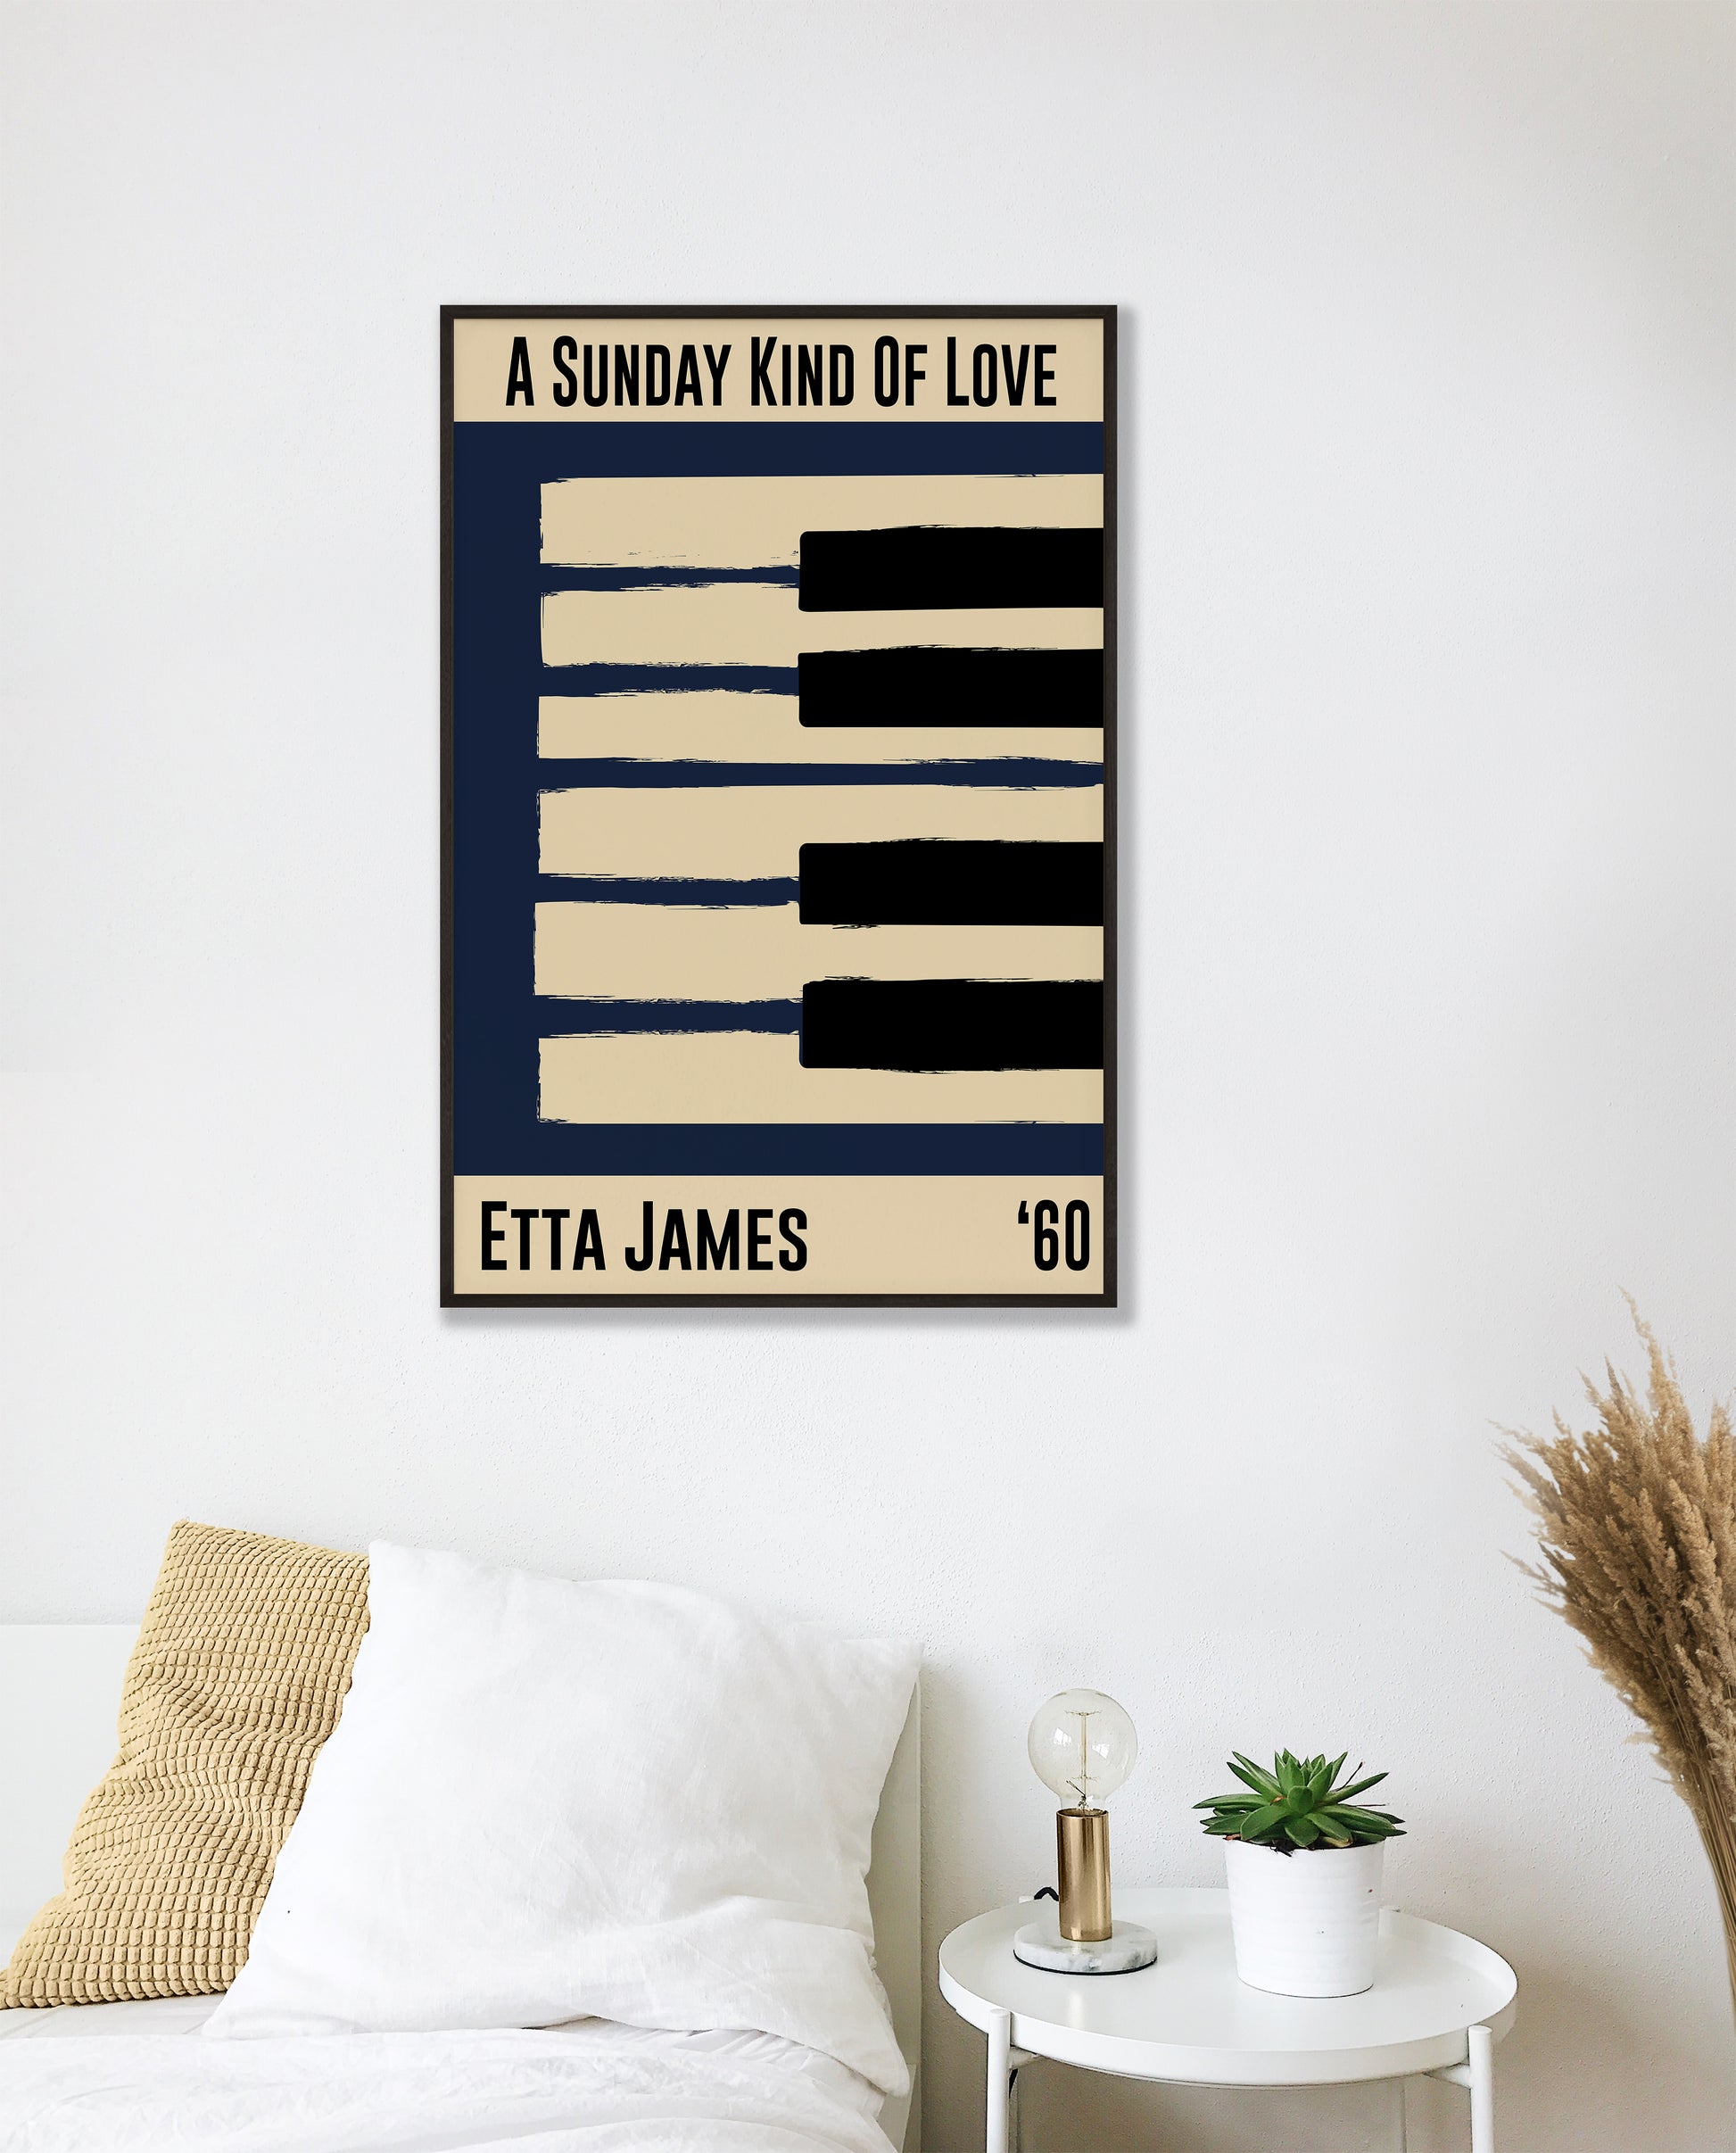 Framed jazz poster featuring a piano design and Etta James' 1960 song 'Sunday Kind of Love'. Vintage music decor, classic jazz art, perfect for jazz enthusiasts and Etta James fans.